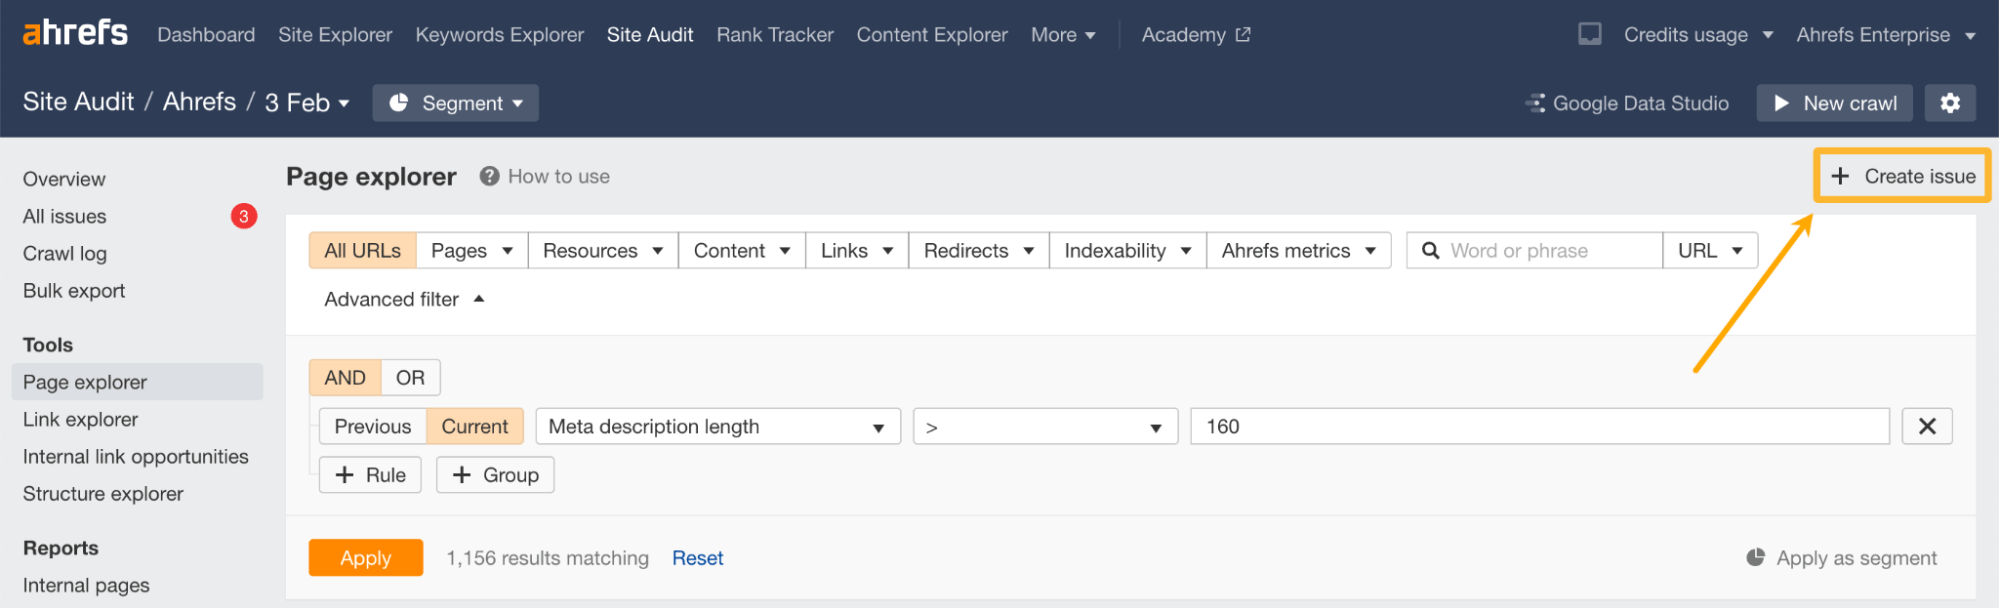 "Create issue" button in the Page explorer report, via Ahrefs' Site Audit
